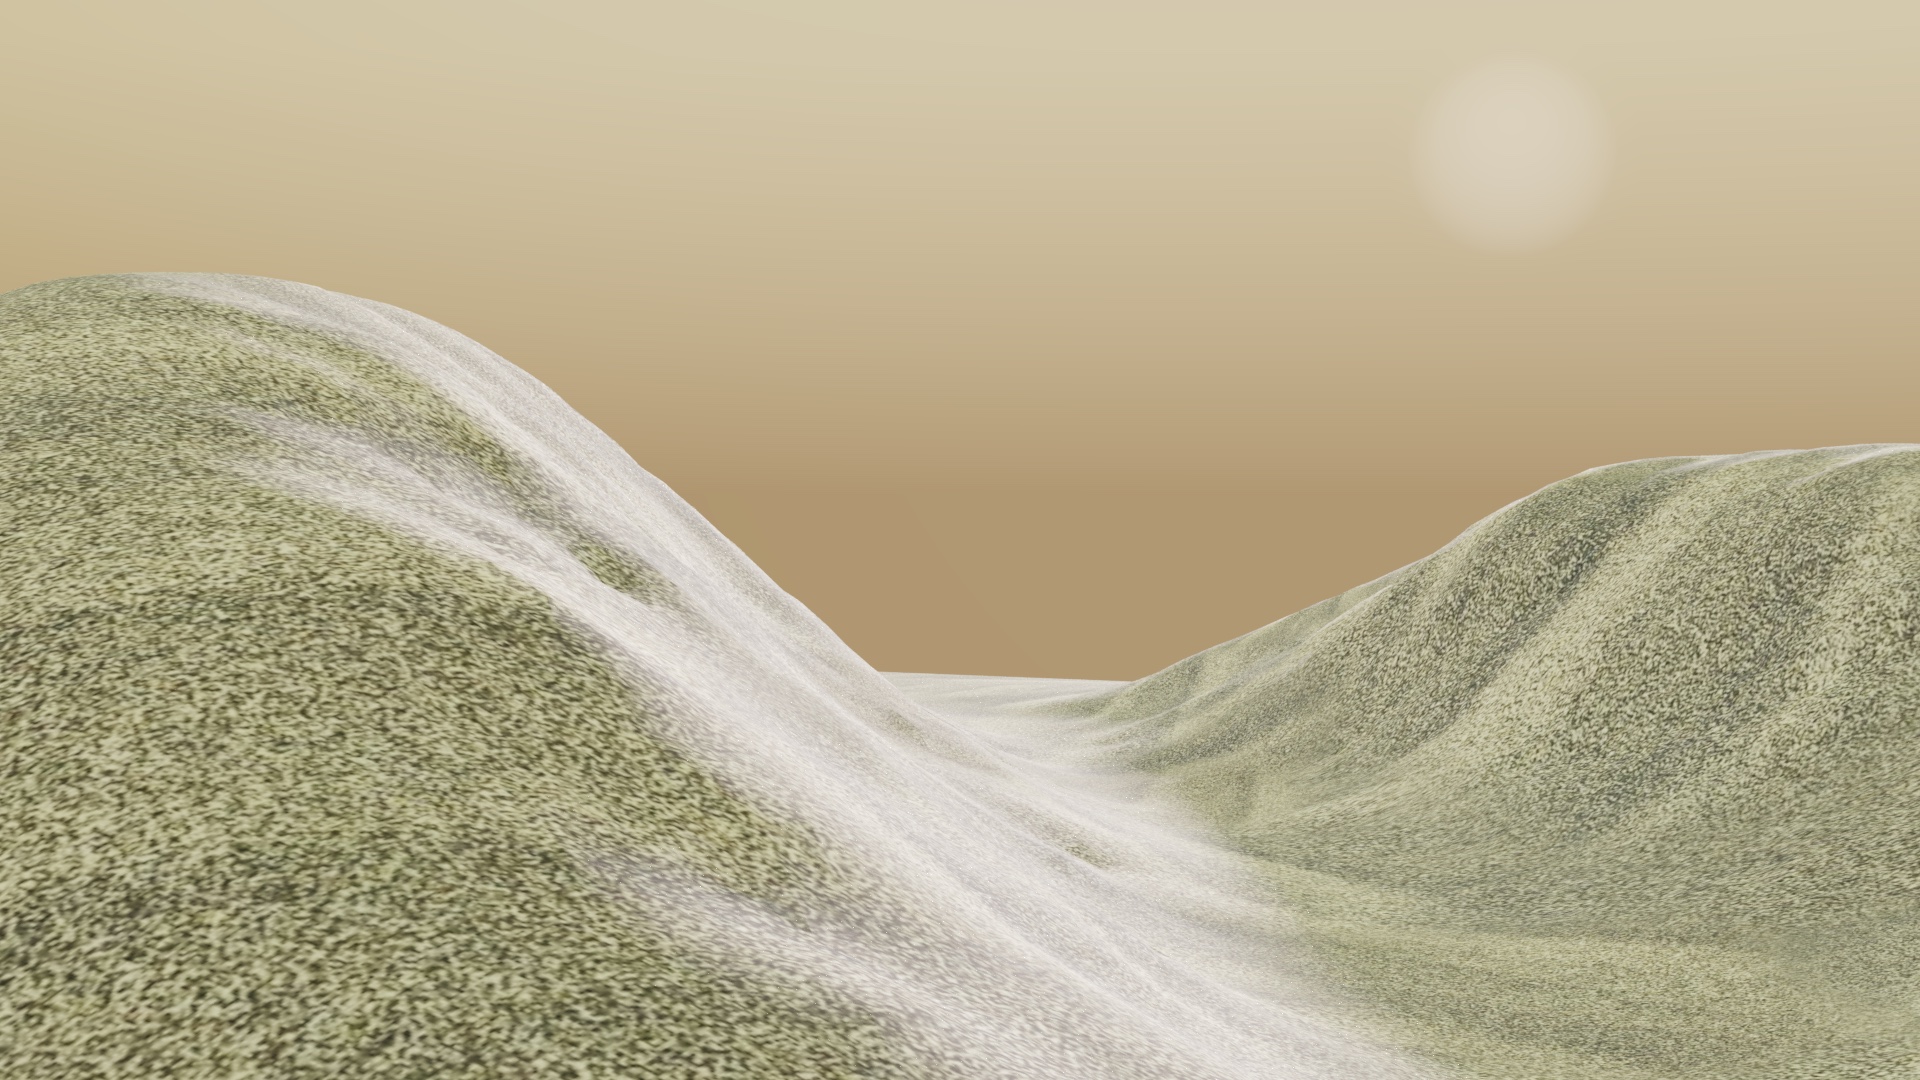 The sun is in the top right corner as you look over rolling sand dunes.